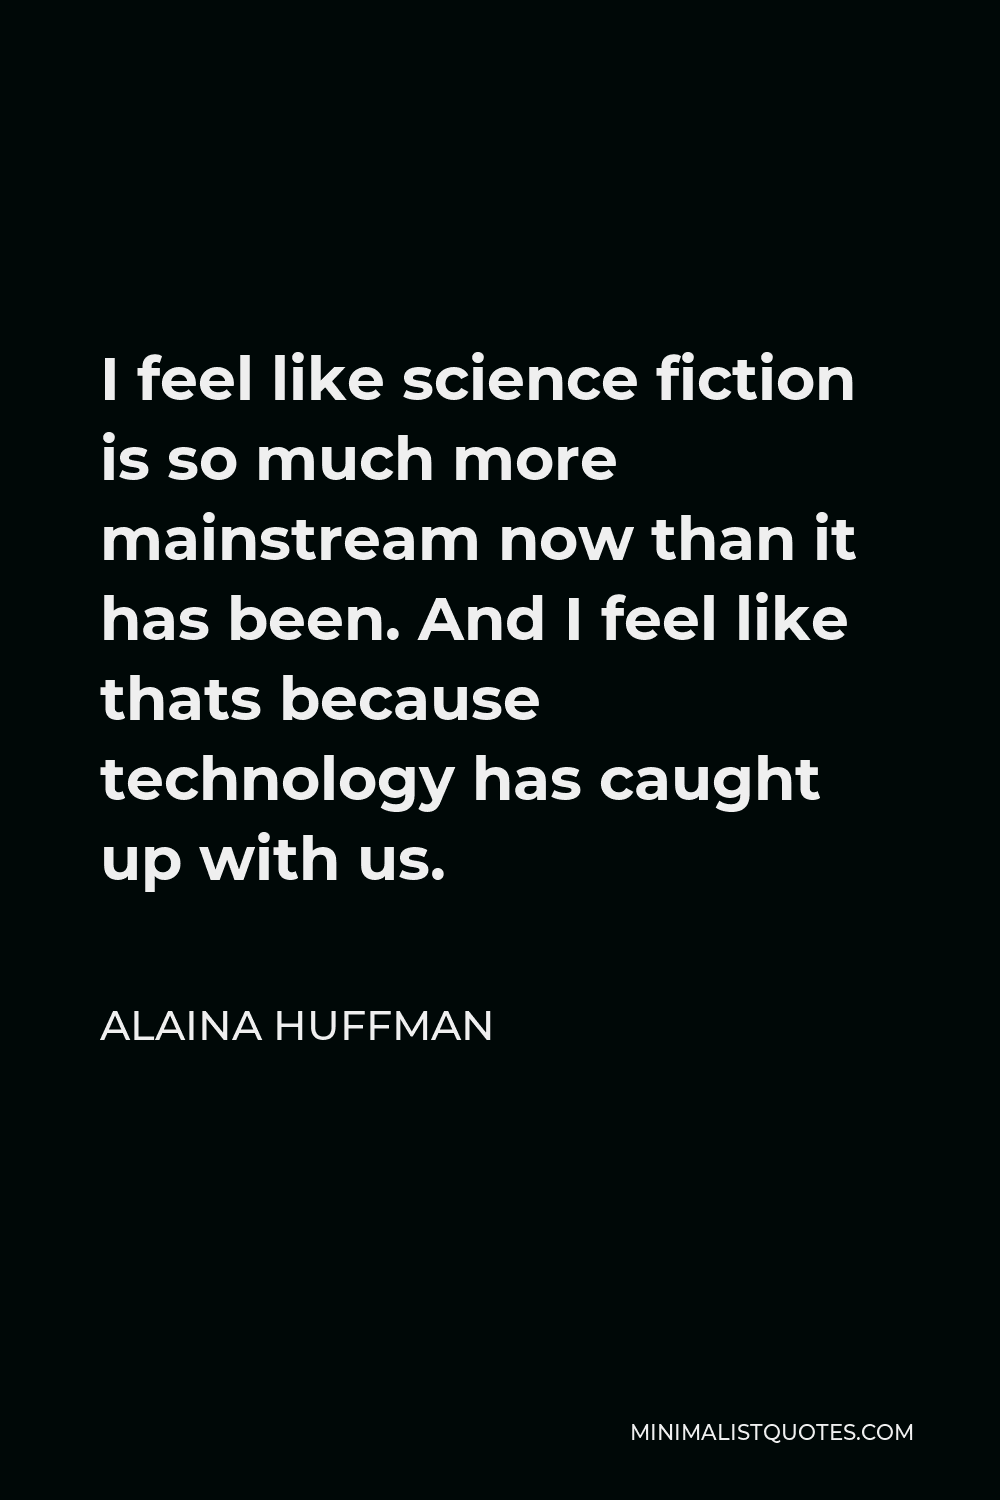 Alaina Huffman Quote - I feel like science fiction is so much more mainstream now than it has been. And I feel like thats because technology has caught up with us.